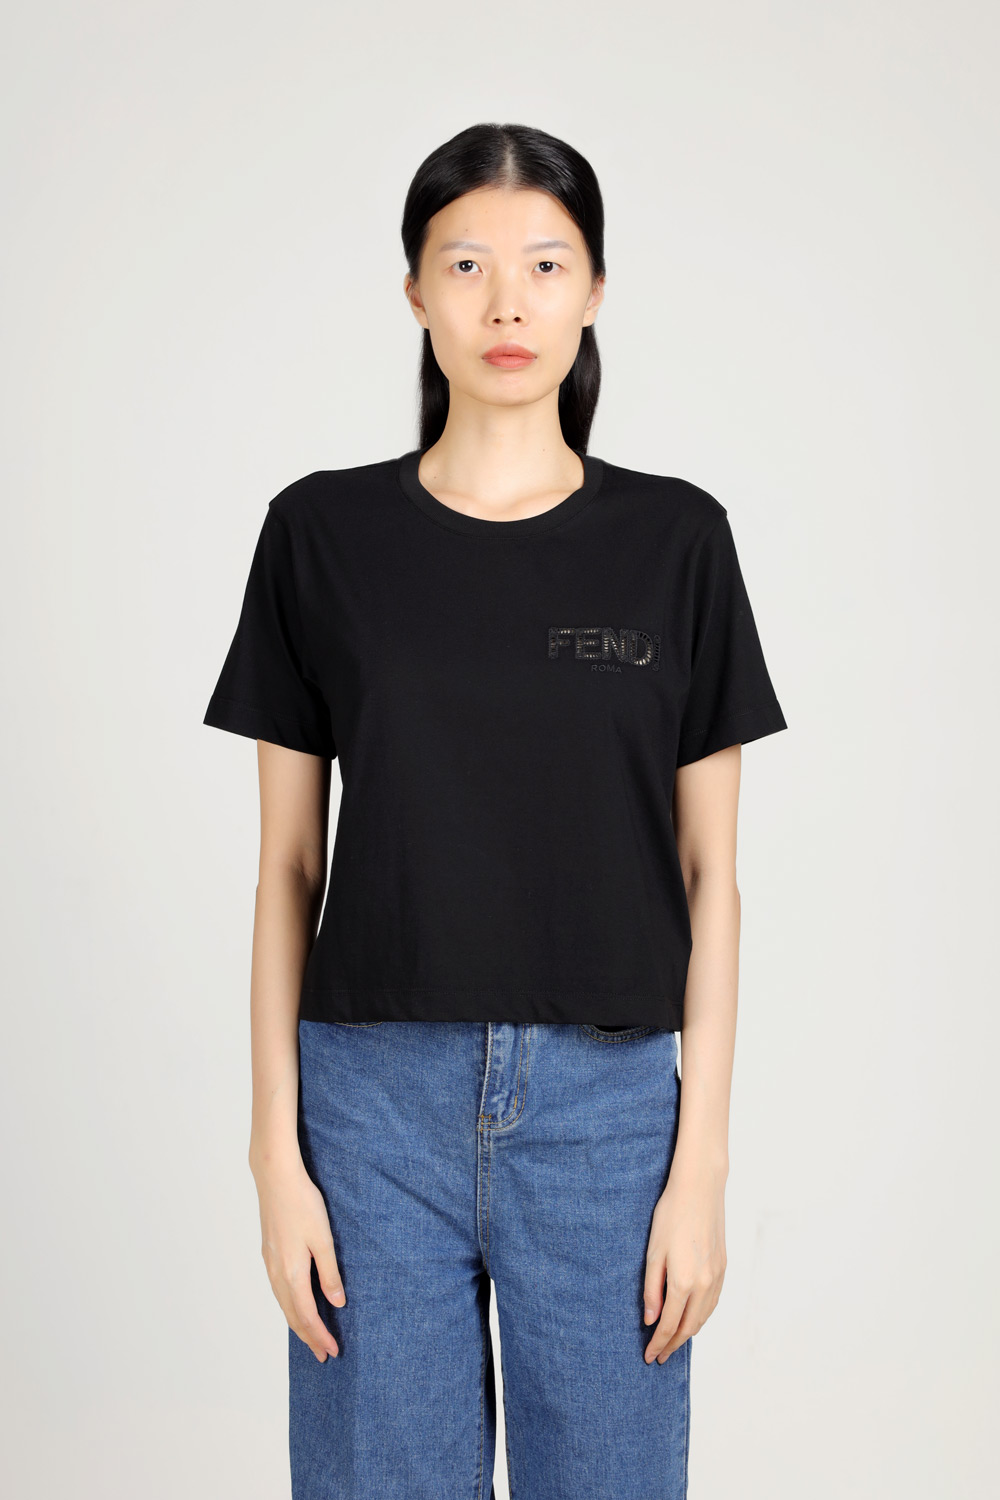 FENDI Women A Jour Embroidered Logo Cropped T-Shirt in Black 1